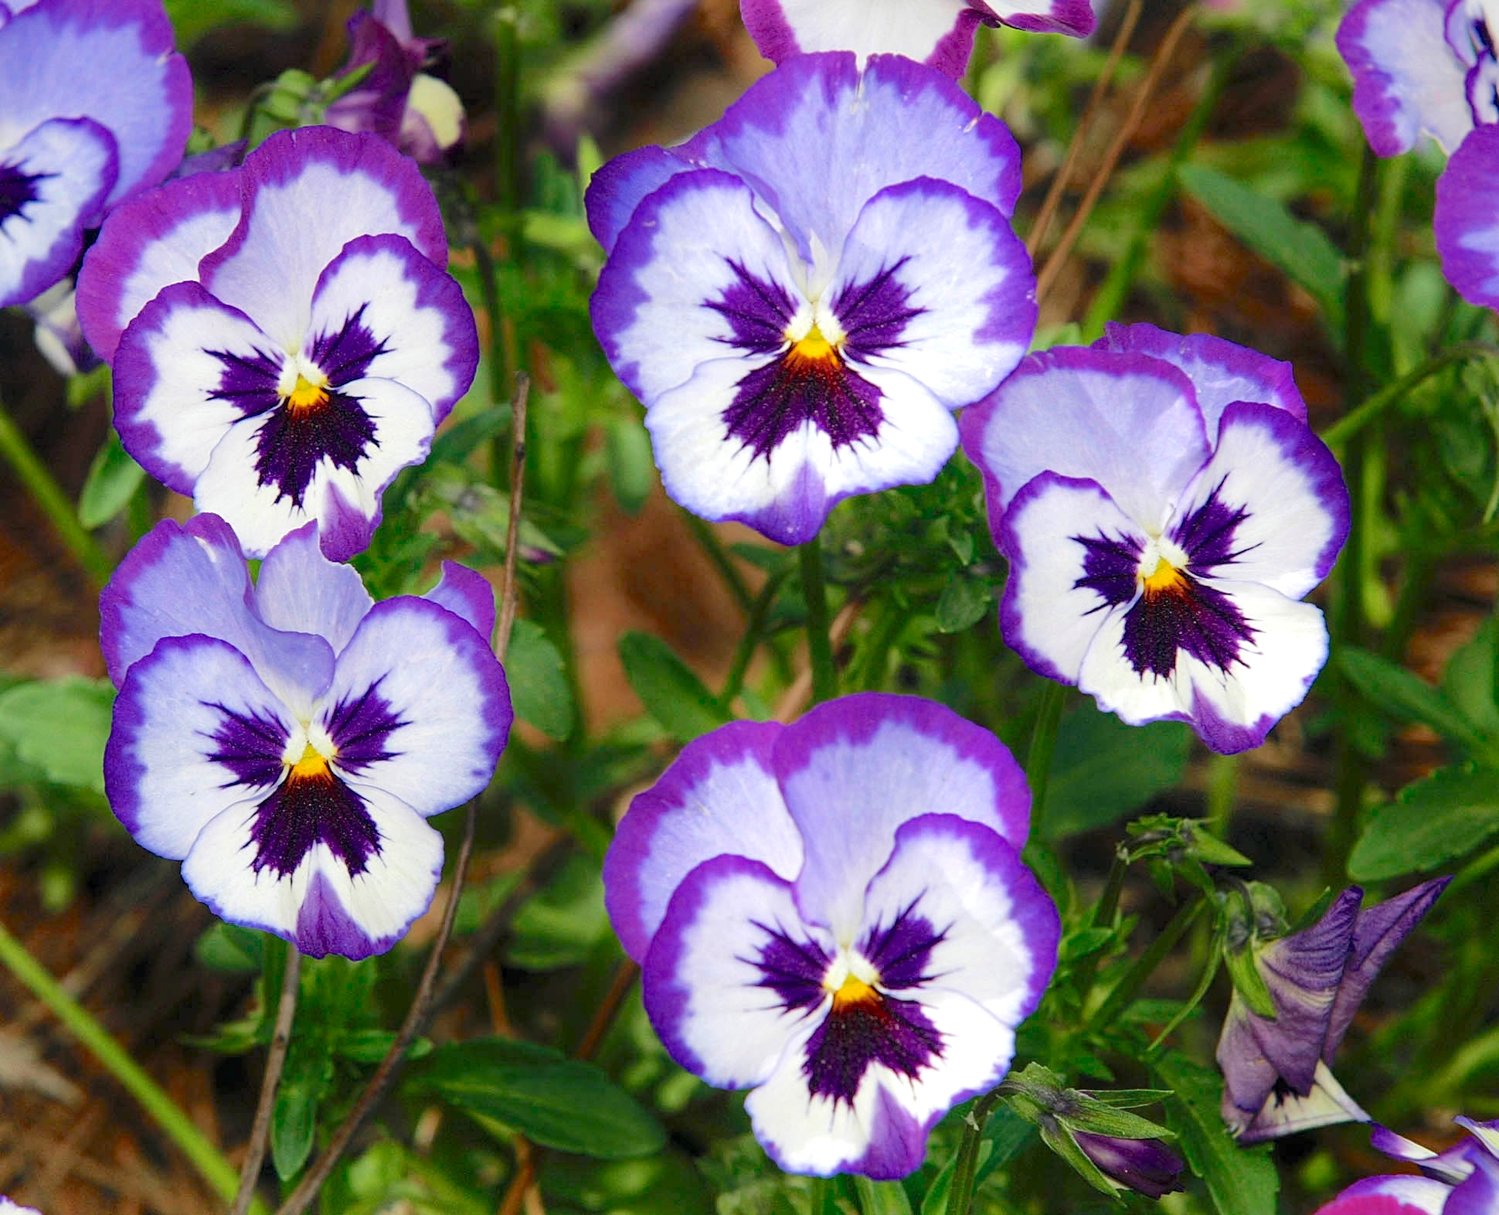 A group of pansies called Panola Violet Picotee grows near the entrance of the University of Tennessee Gardens, in Knoxville, Tenn.